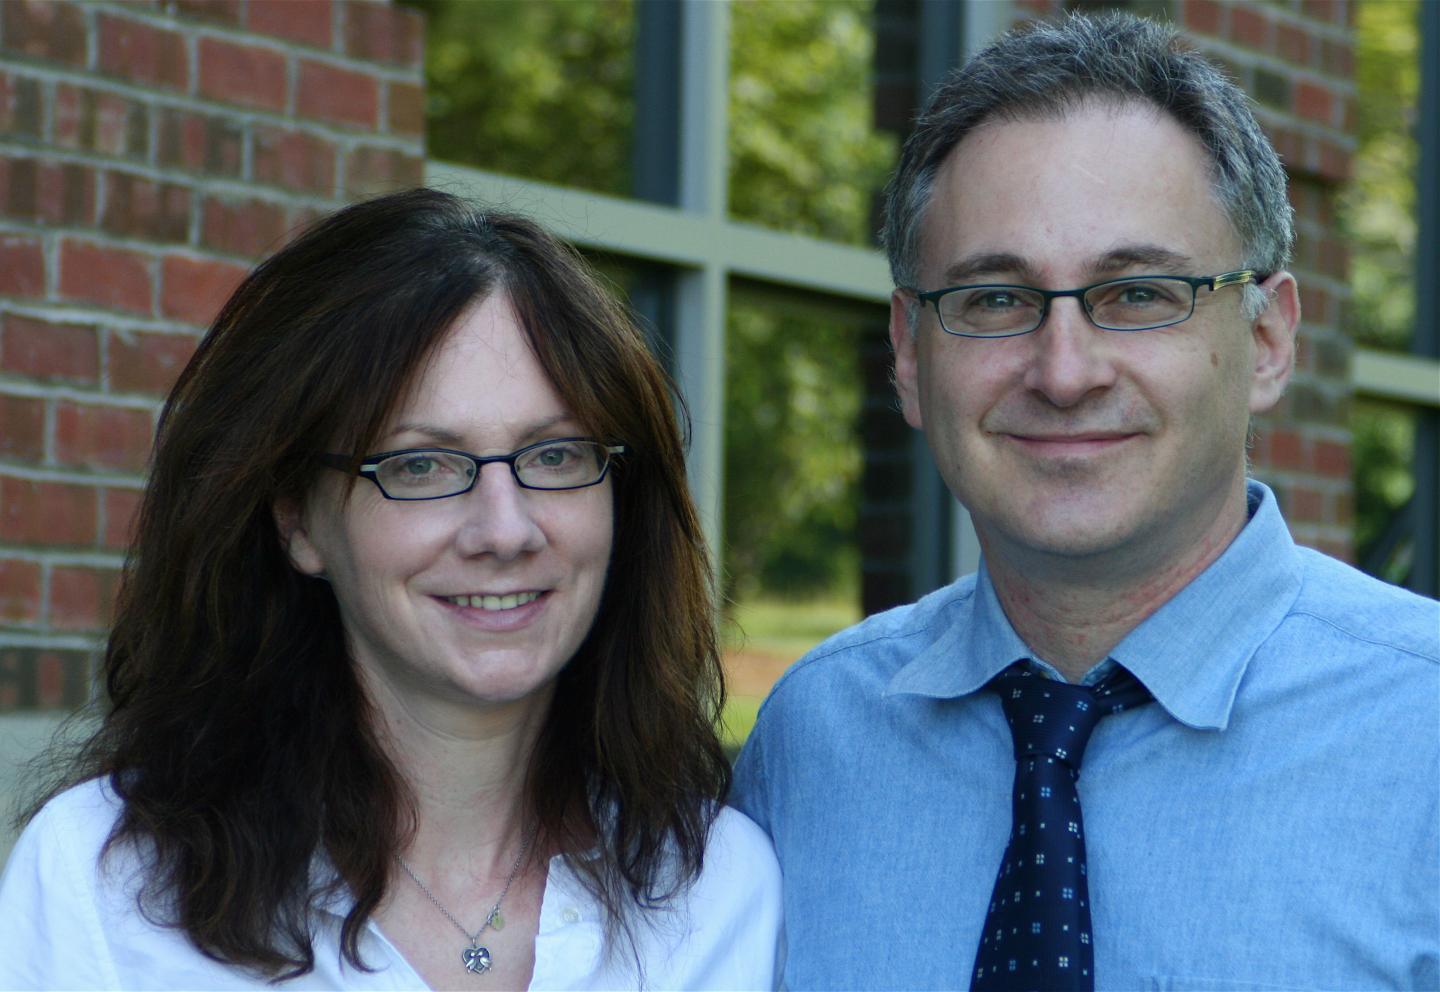 Lisa Schwartz and Steven Woloshin, Dartmouth Institute for Health Policy & Clinical Practice